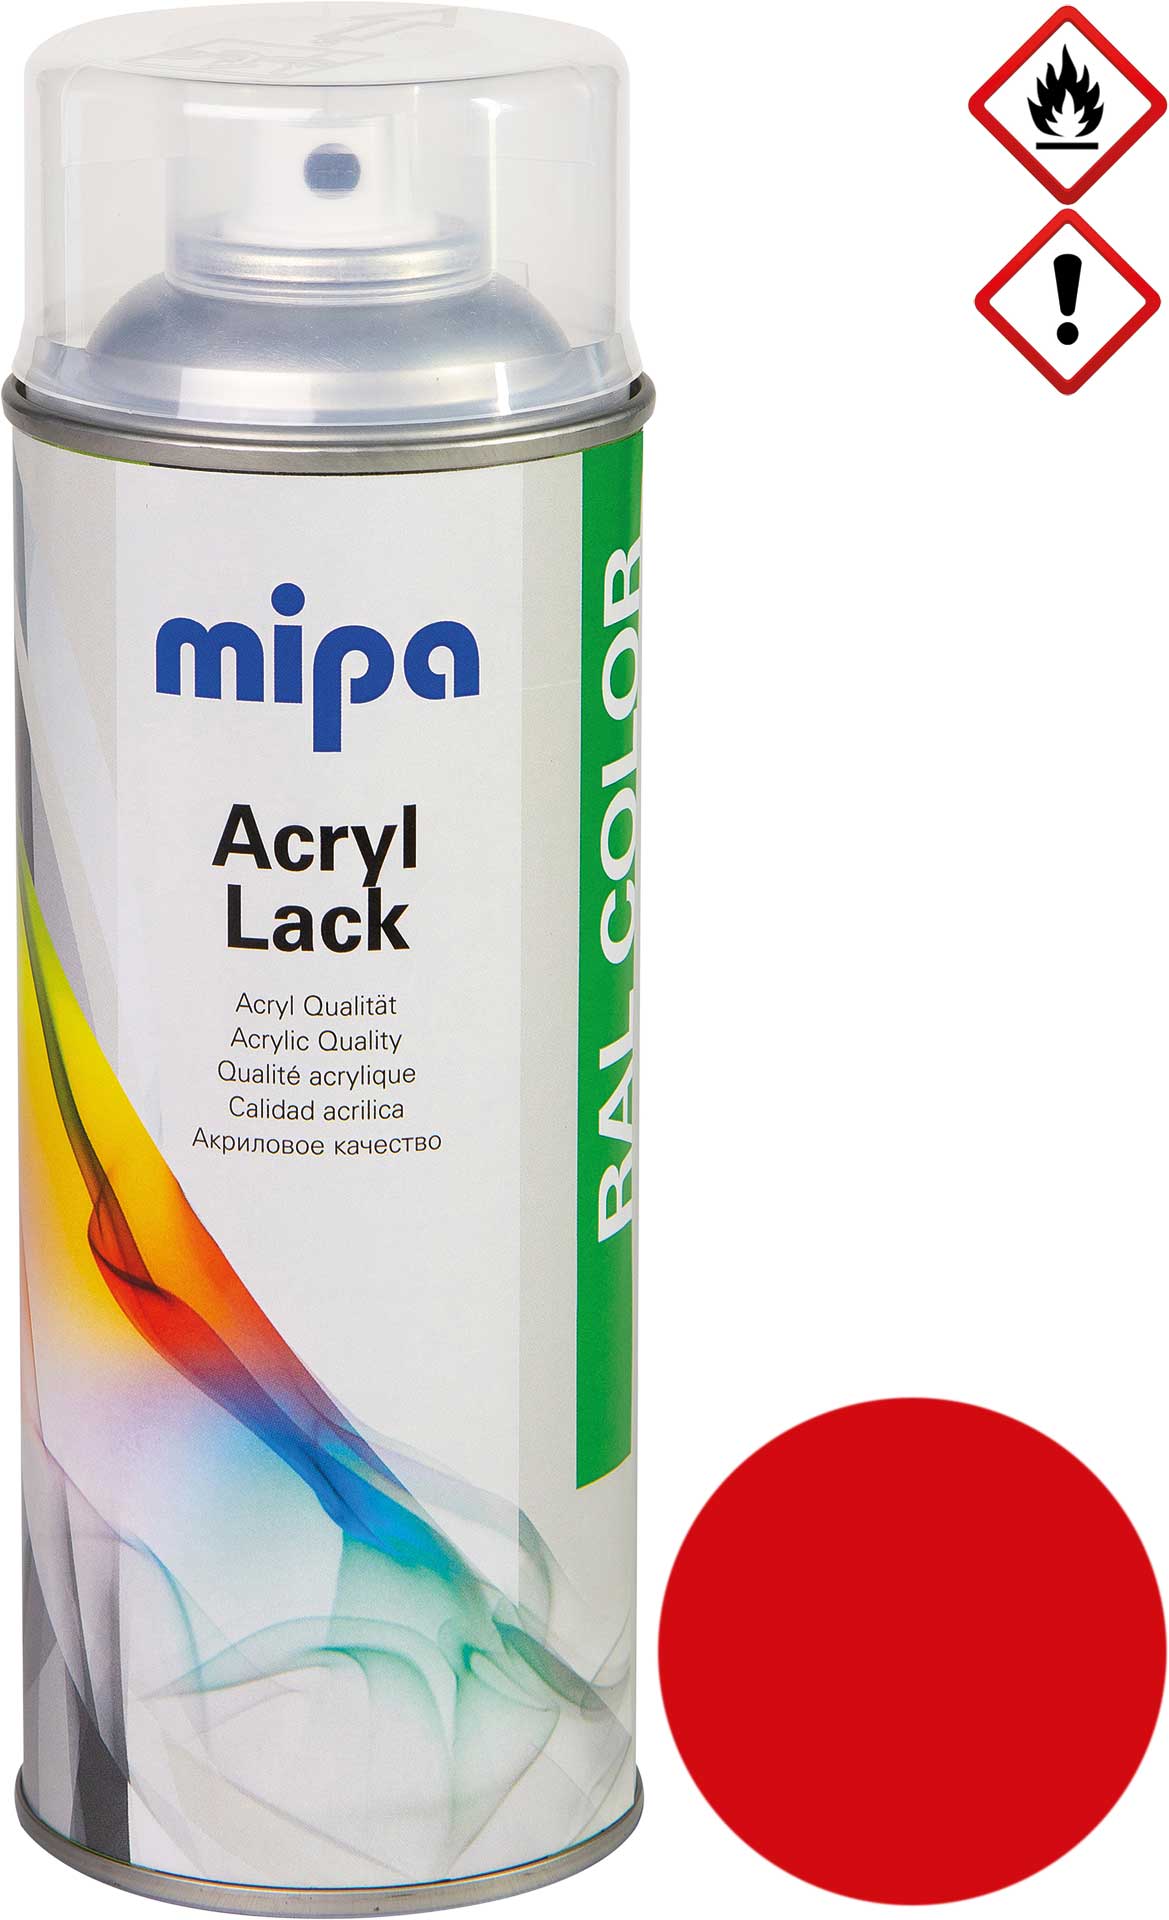 mipa RAL 3020 Traffic red 1K-Acrylic Lacquer spray 400 ml